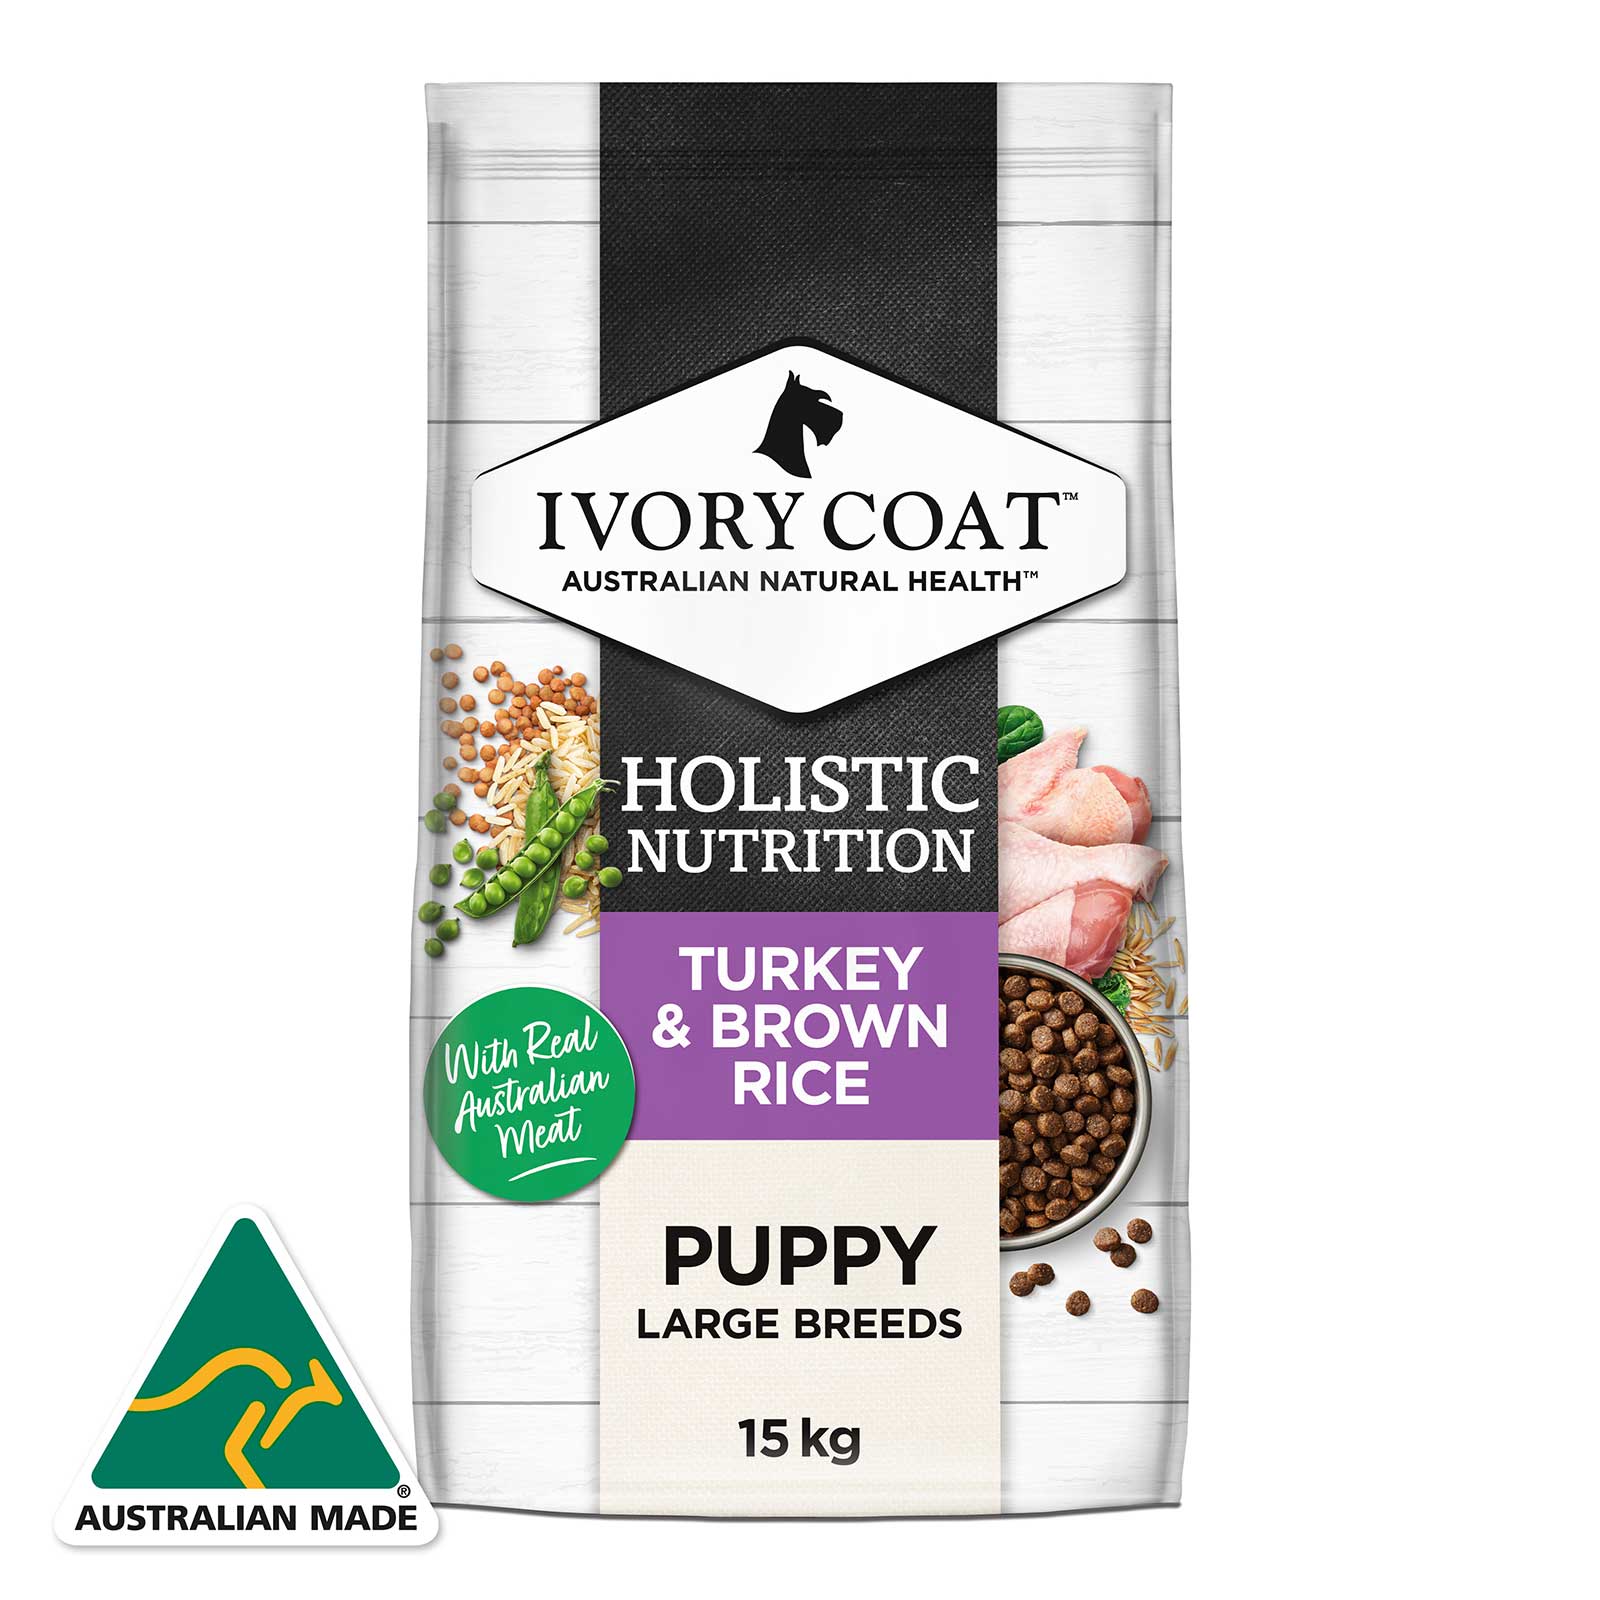 Ivory Coat Dog Food Puppy Large Breed Turkey & Brown Rice